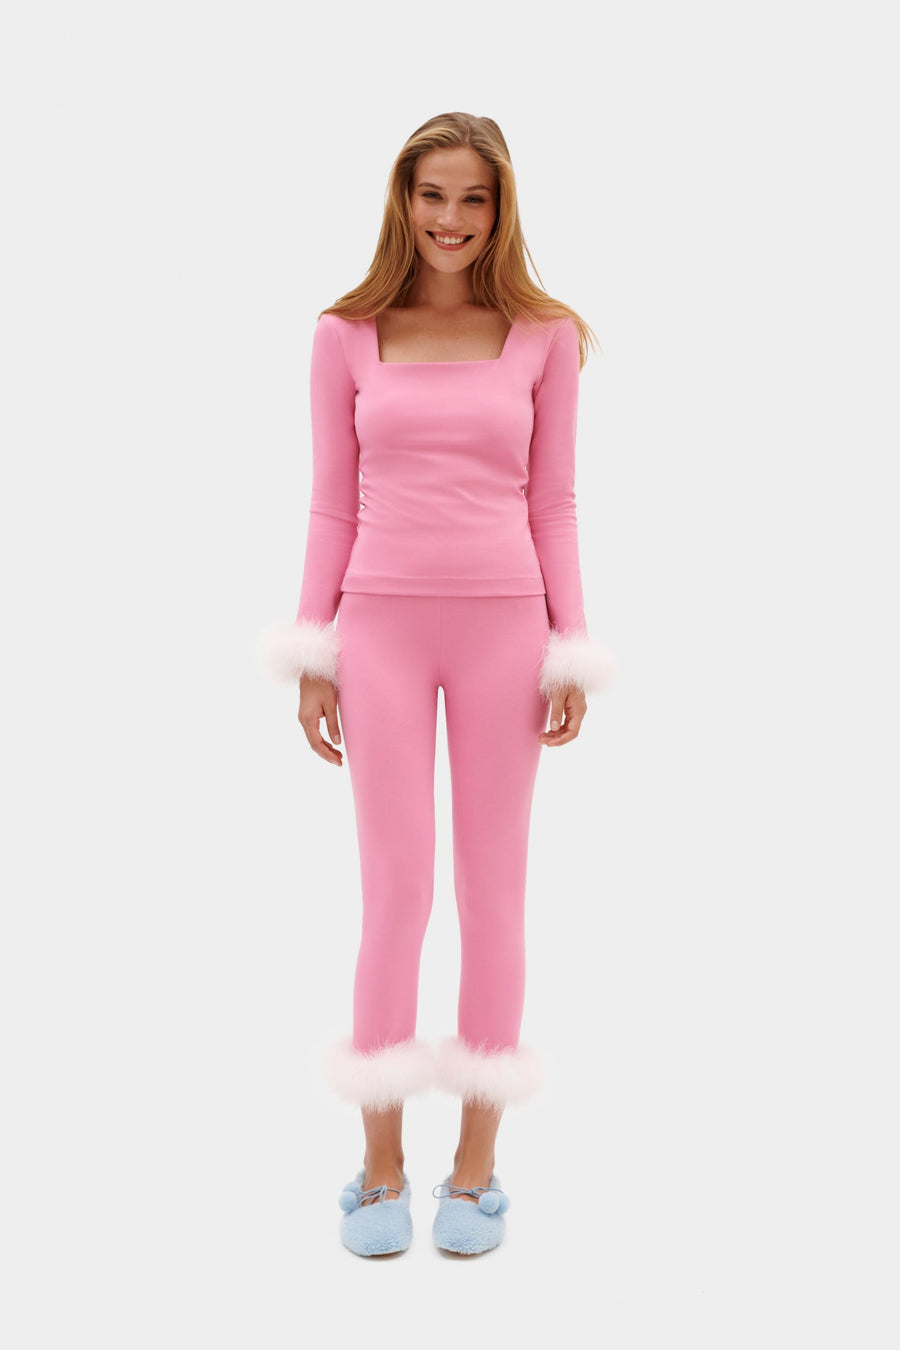 Sleeper - Weekend Chic Set Top Only - Pink